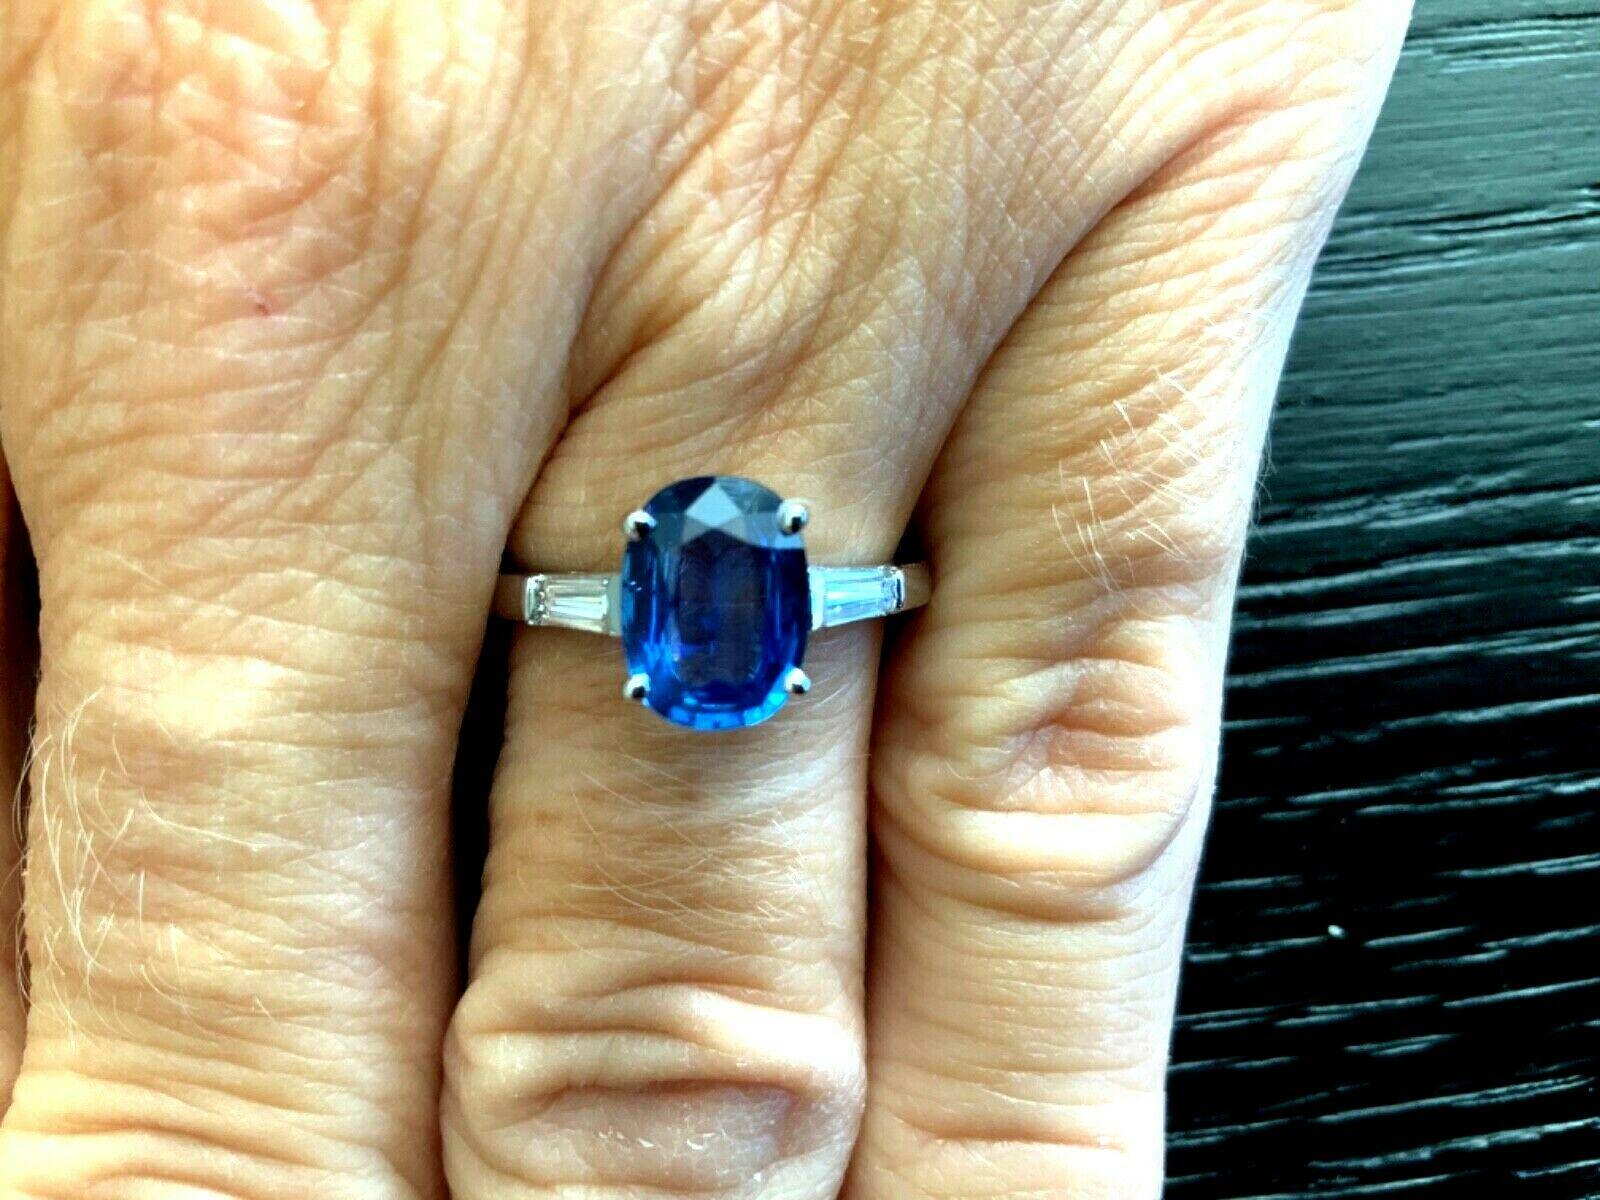 JUST IN TIME FOR THE HOLIDAYS!

We have been able to purchase one of the NICEST, Natural 3.34 carat Thai Natural BLUE Oval Cut sapphires we have ever seen.  Do your homework and you will realize how rare and expensive Natural Blue Sapphires truly